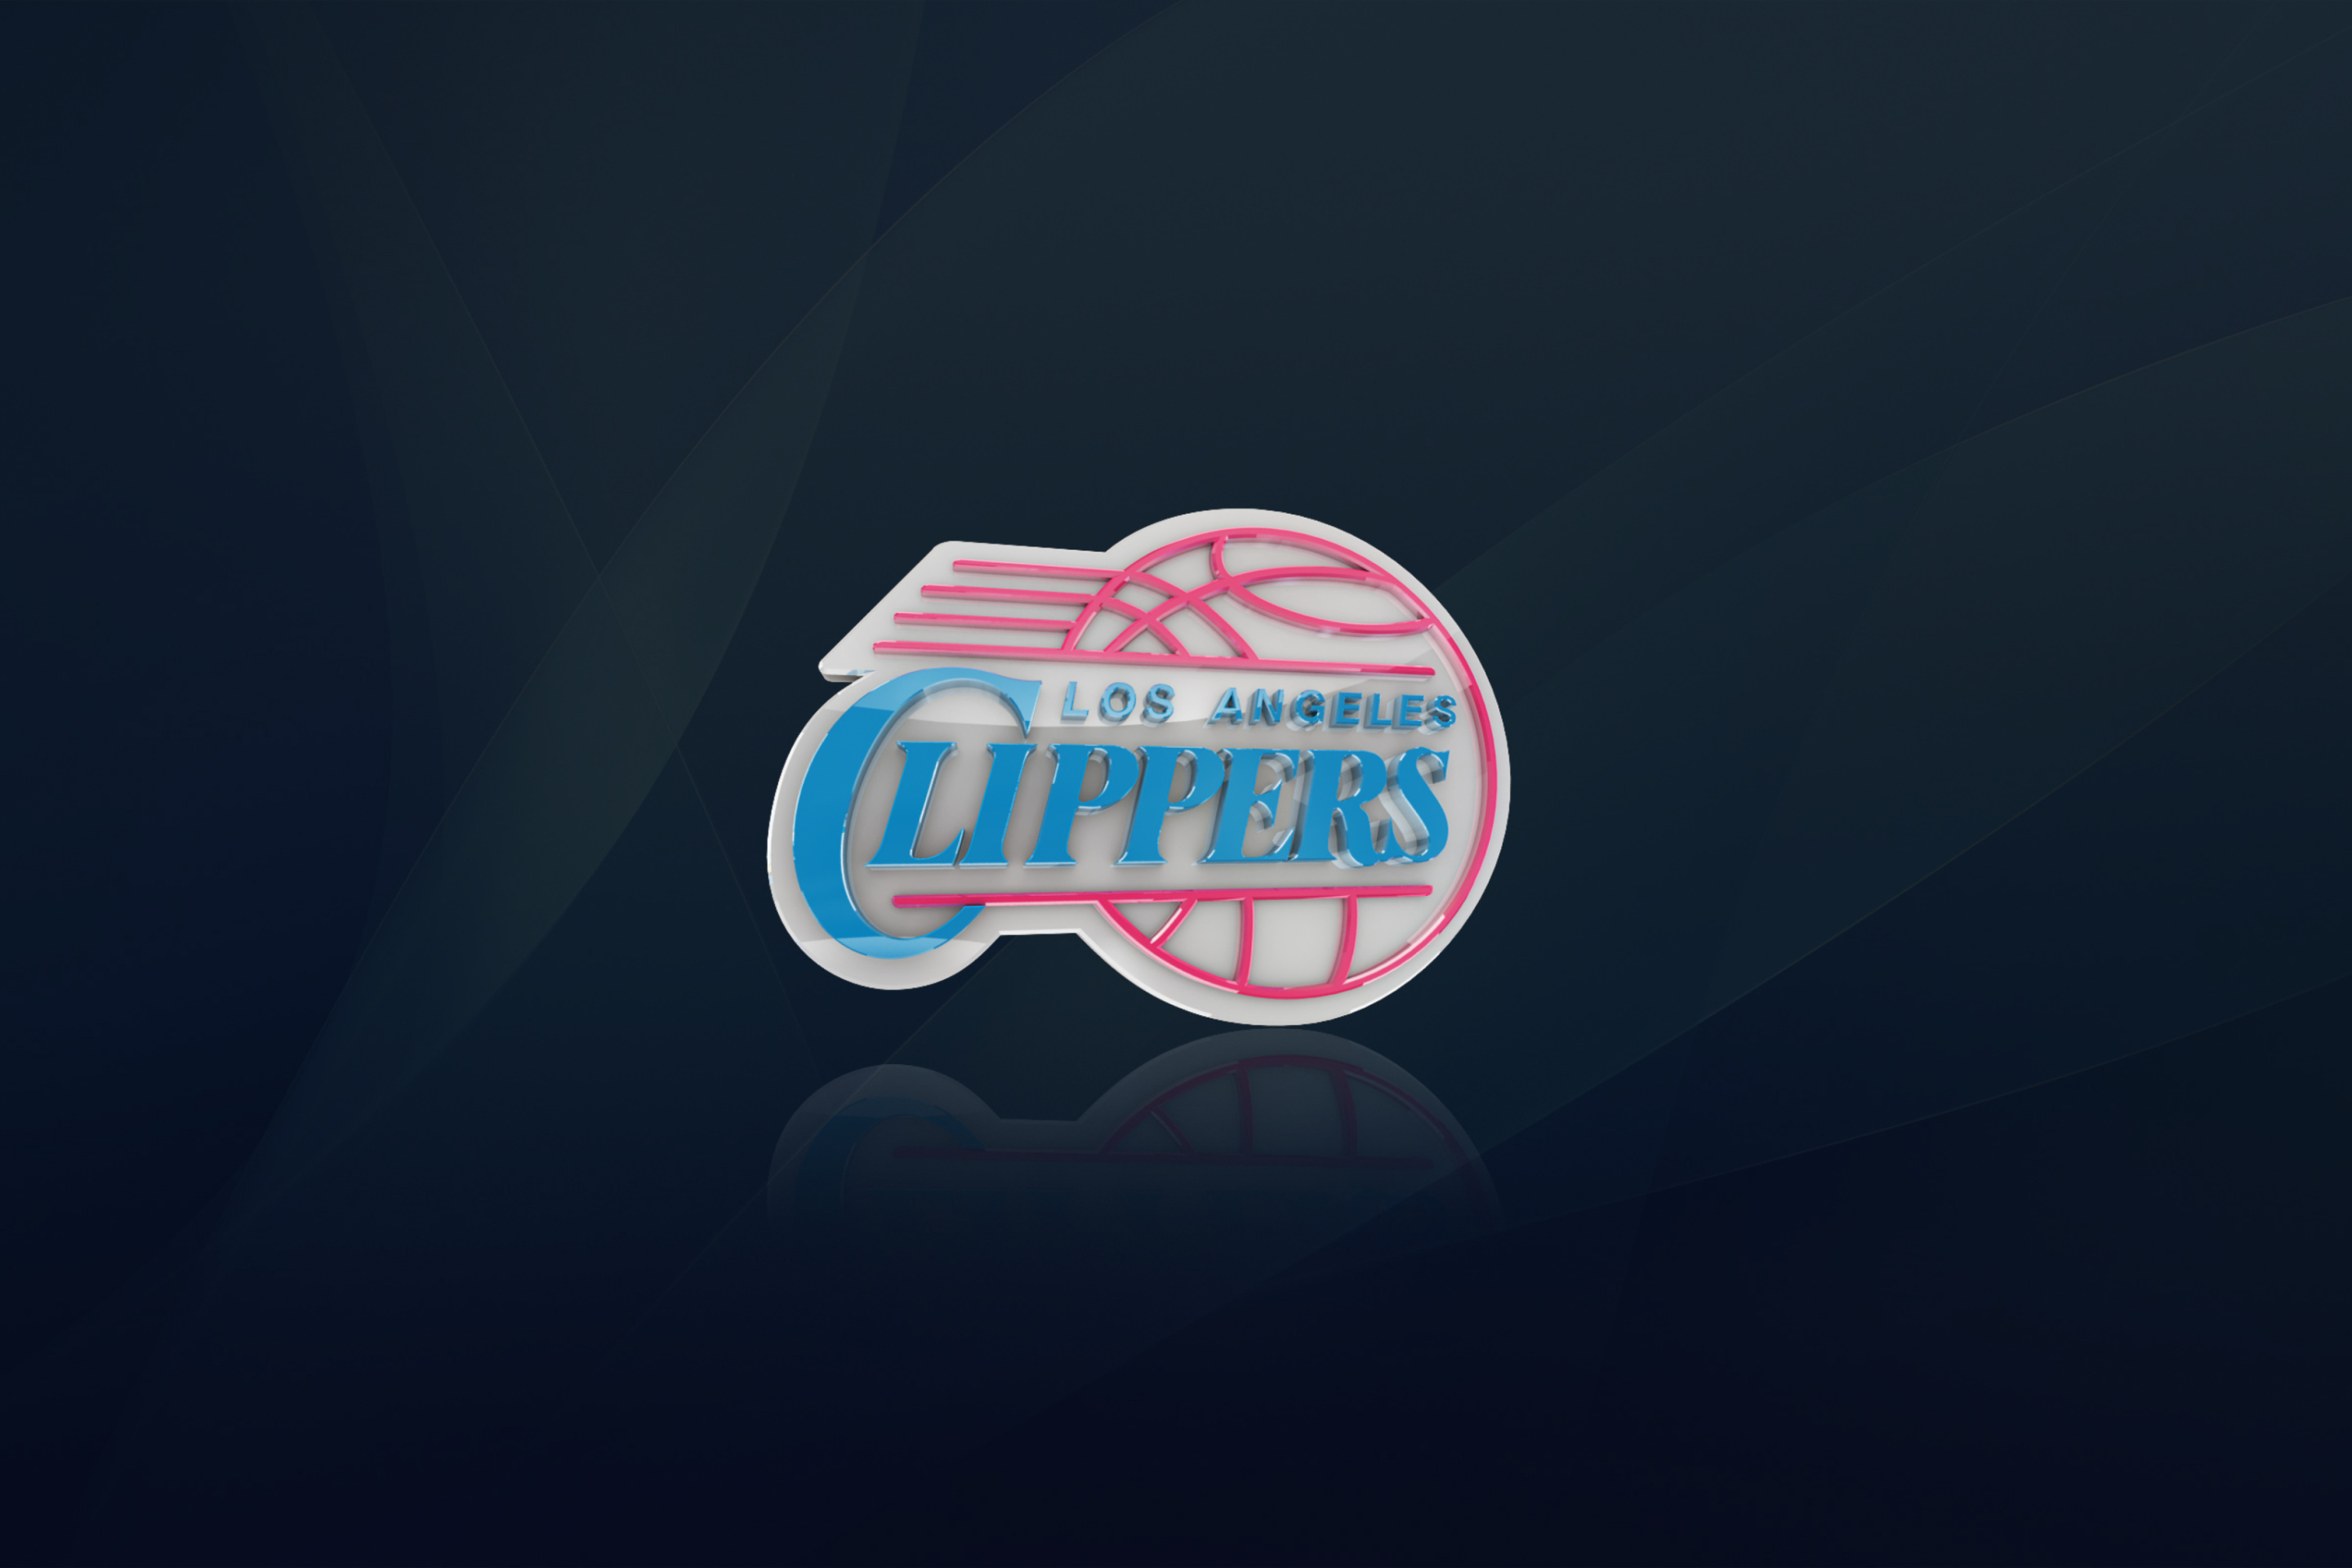 Los Angeles Clippers wallpaper 2880x1920